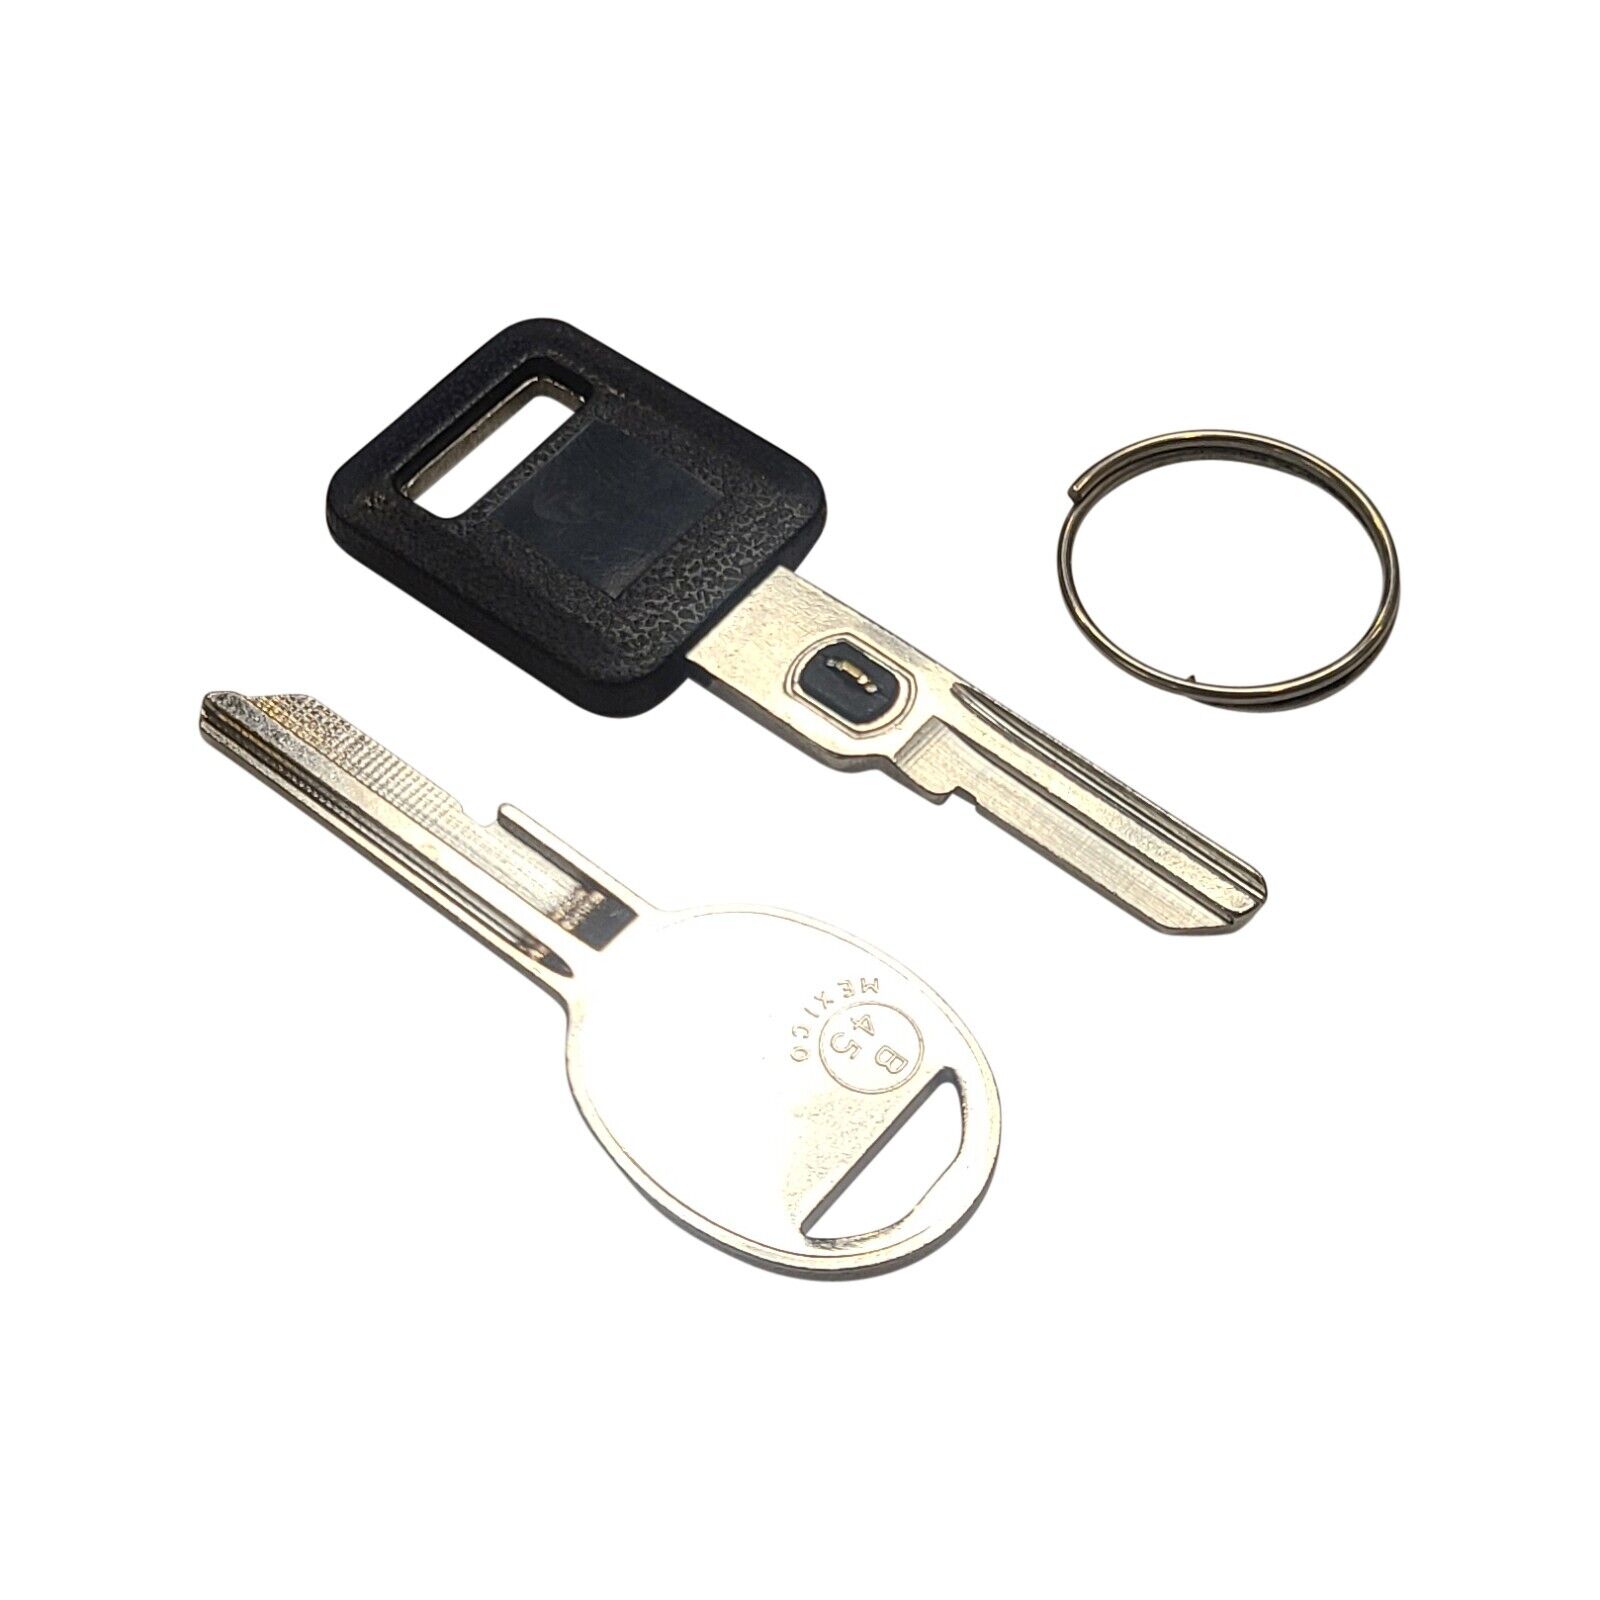 New Ignition VATS Resistor Key B62-P15 For Gm Vehicles And H Door Key B45